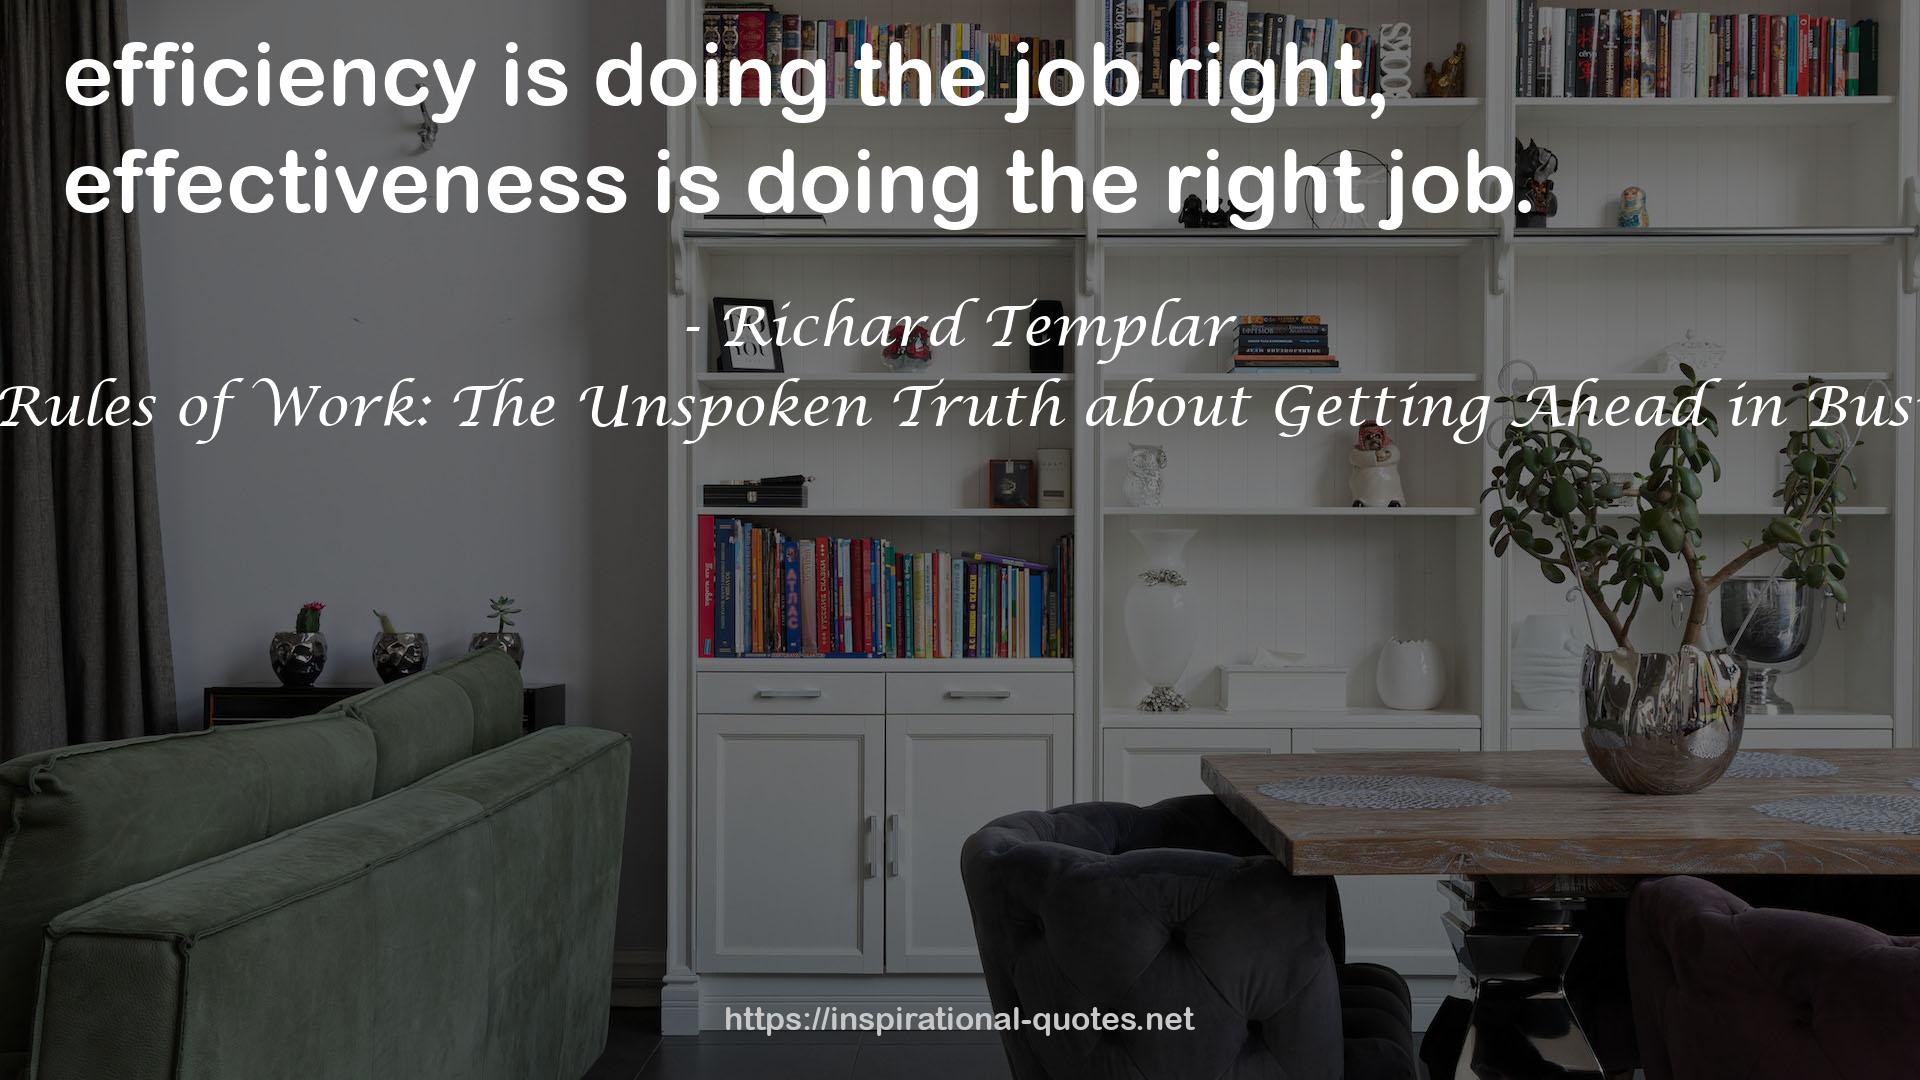 The Rules of Work: The Unspoken Truth about Getting Ahead in Business QUOTES